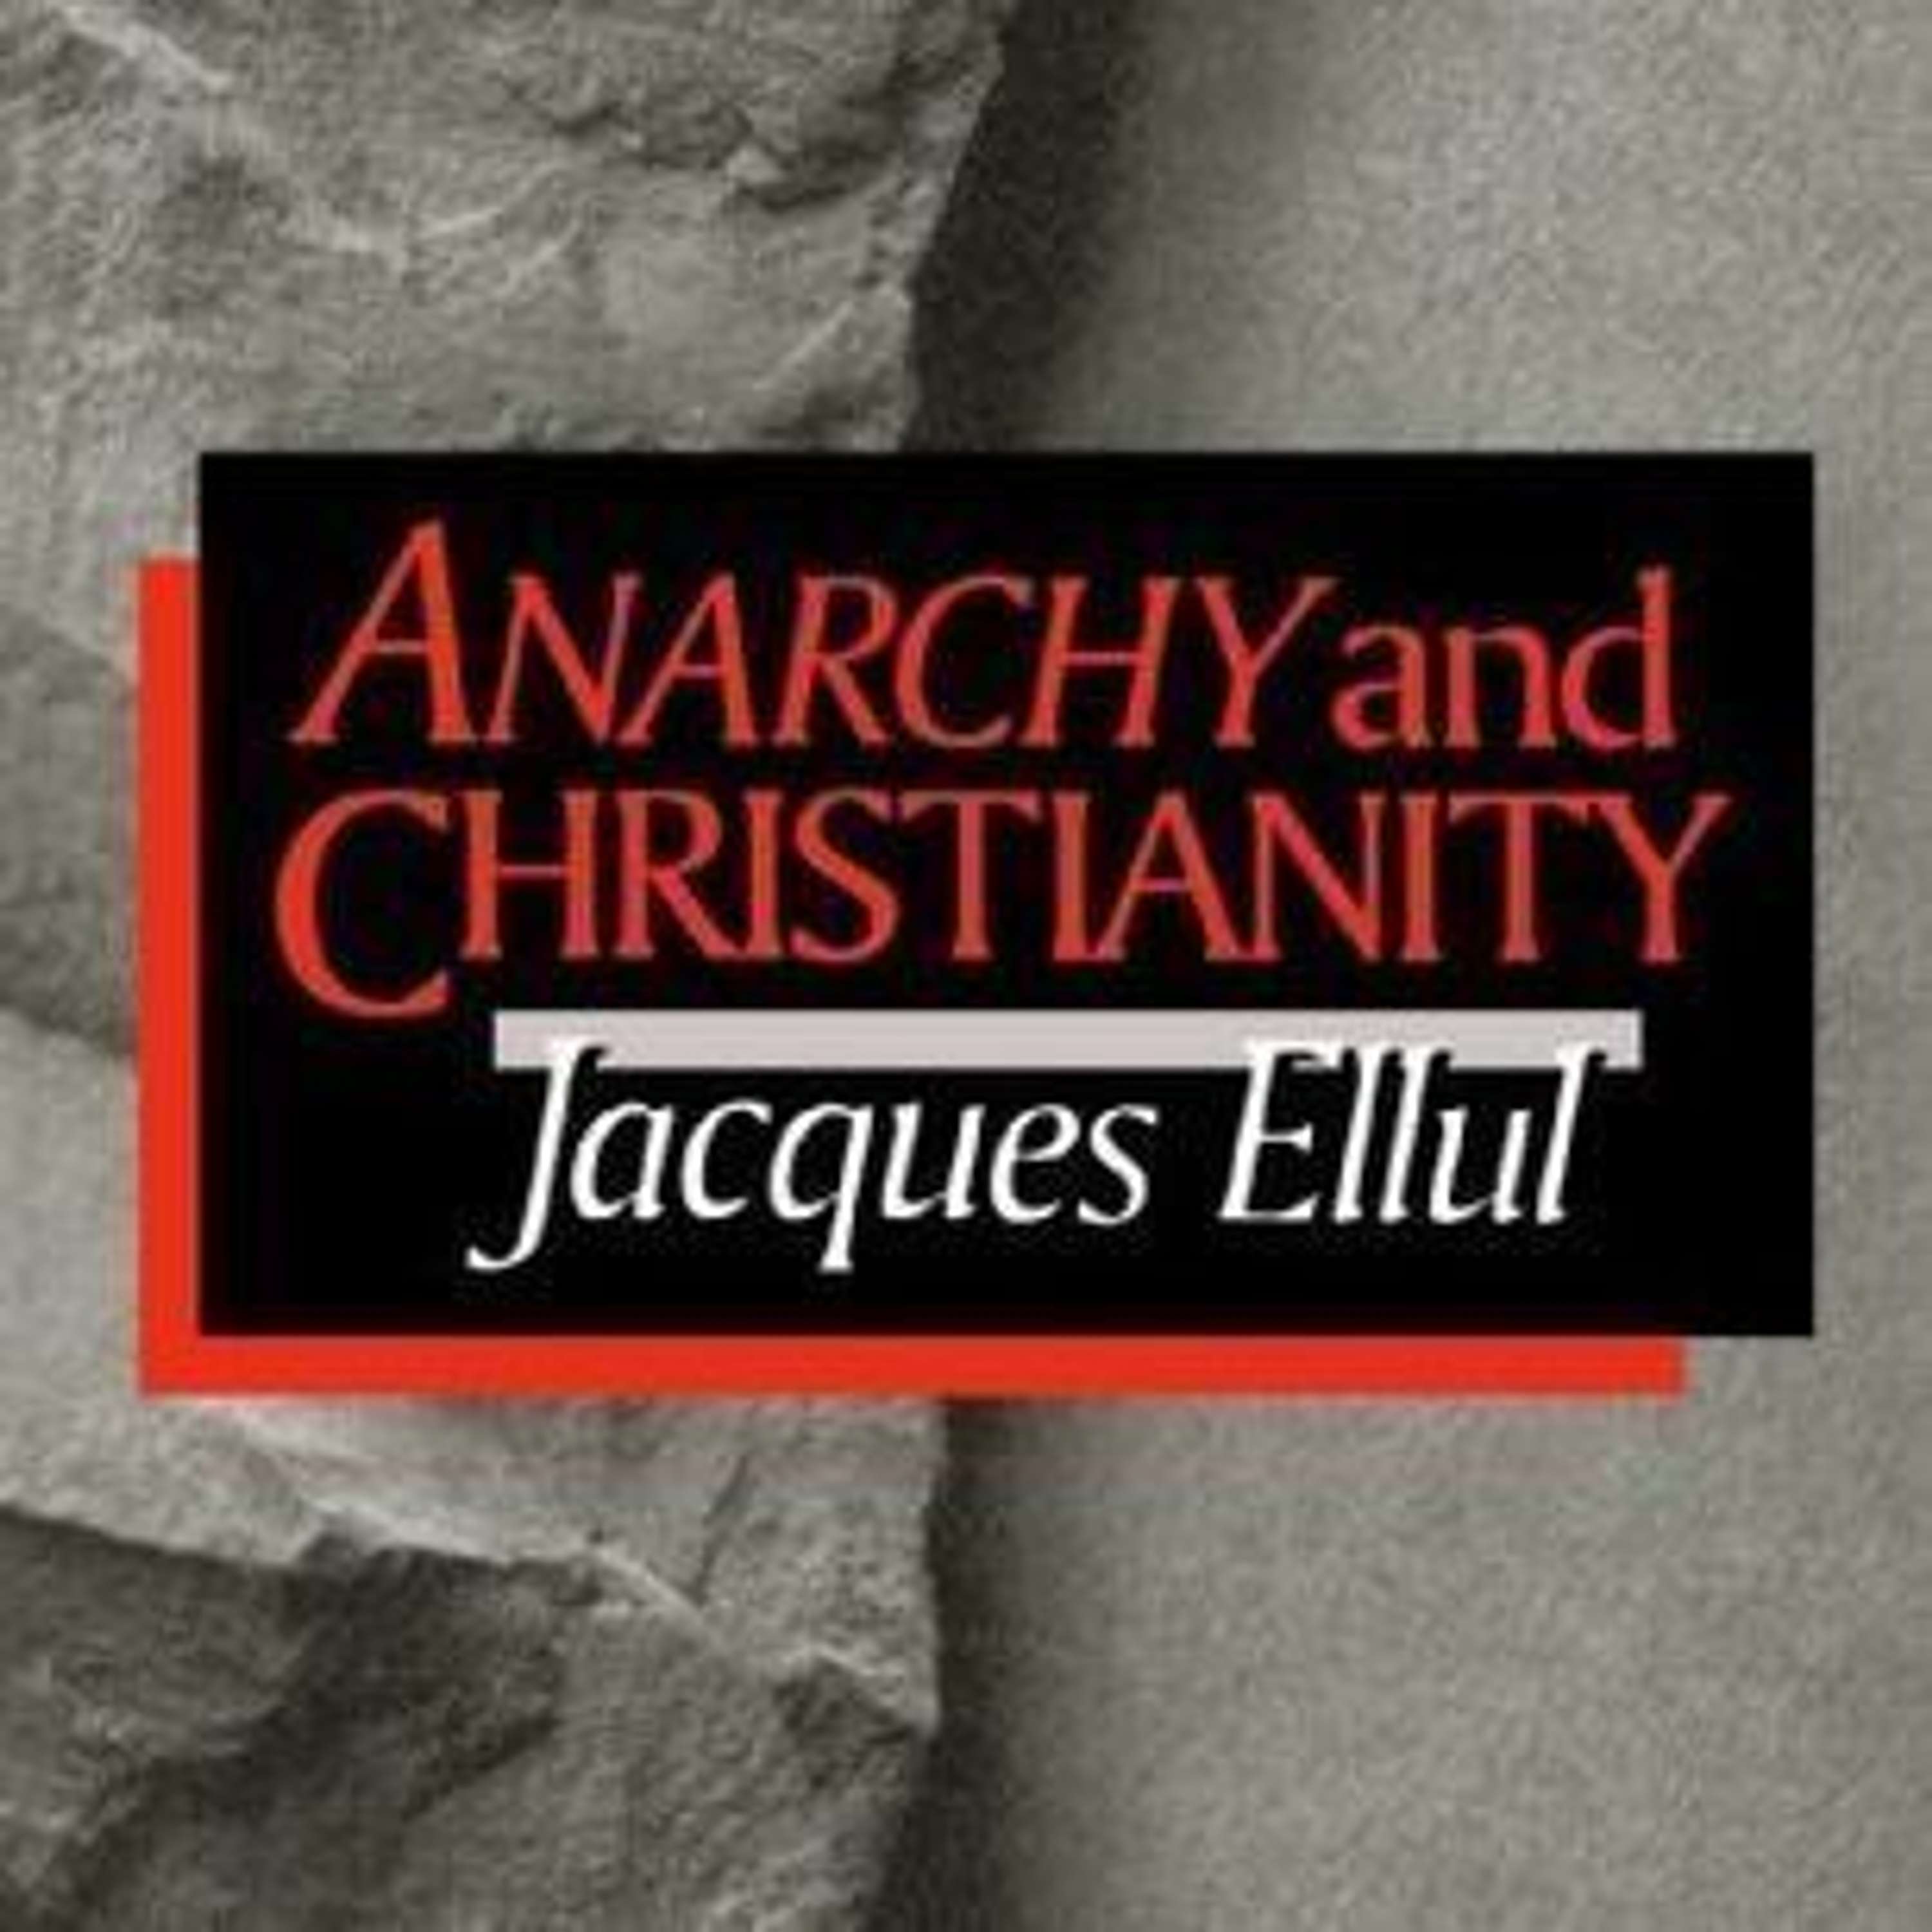 Ep 52 - Anarchy and Christianity Redux